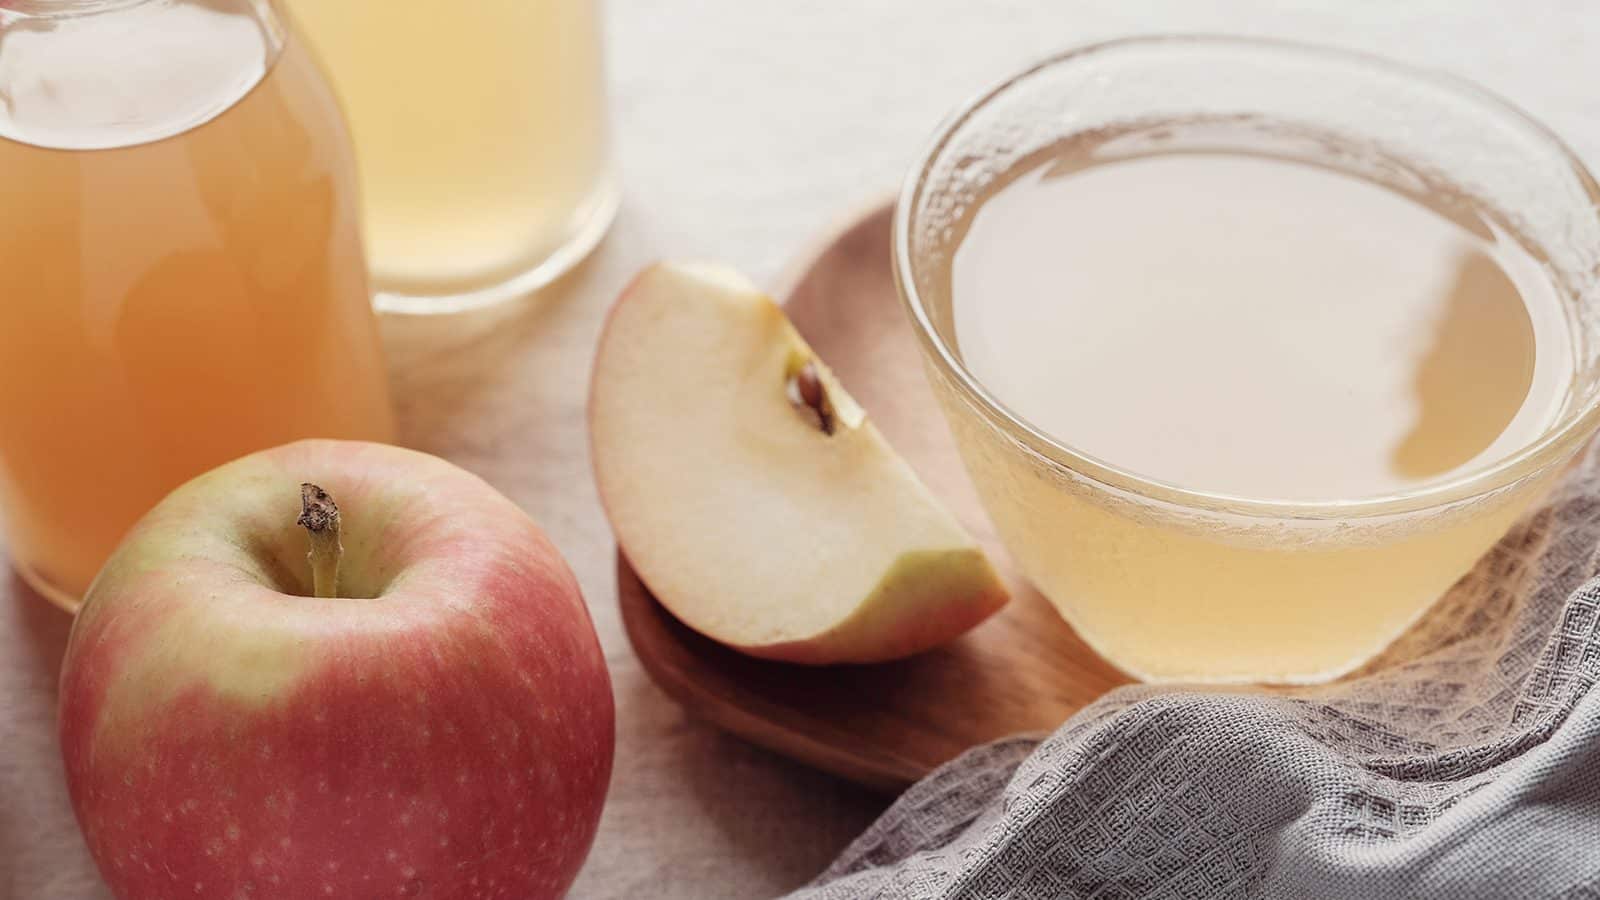 New Research Links Apple Cider Vinegar To A Better Mood